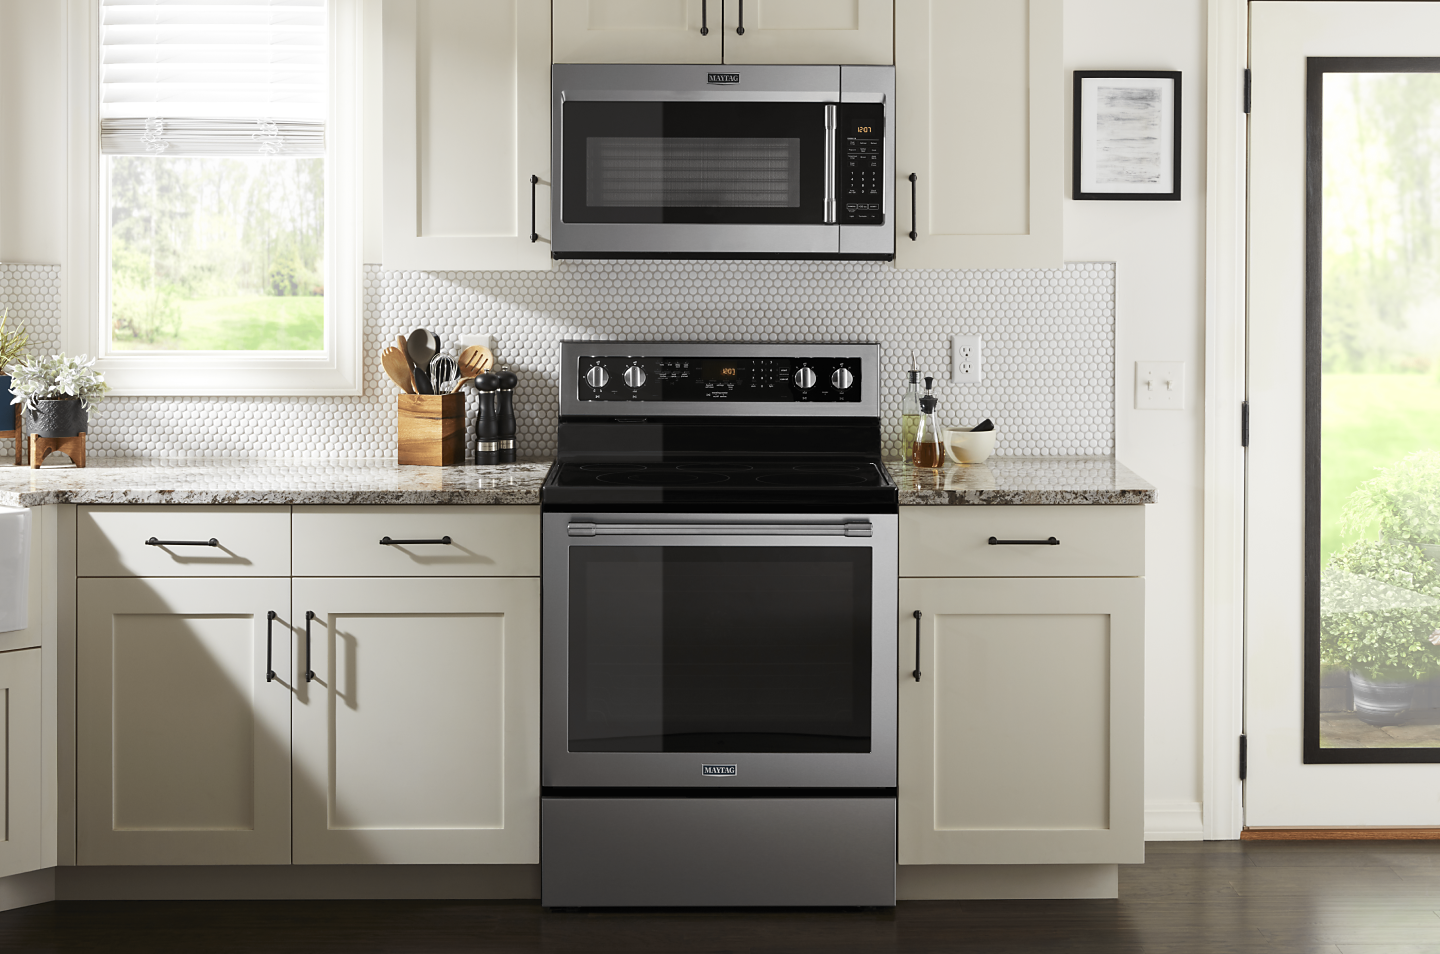 A set of Maytag microwave and convection oven